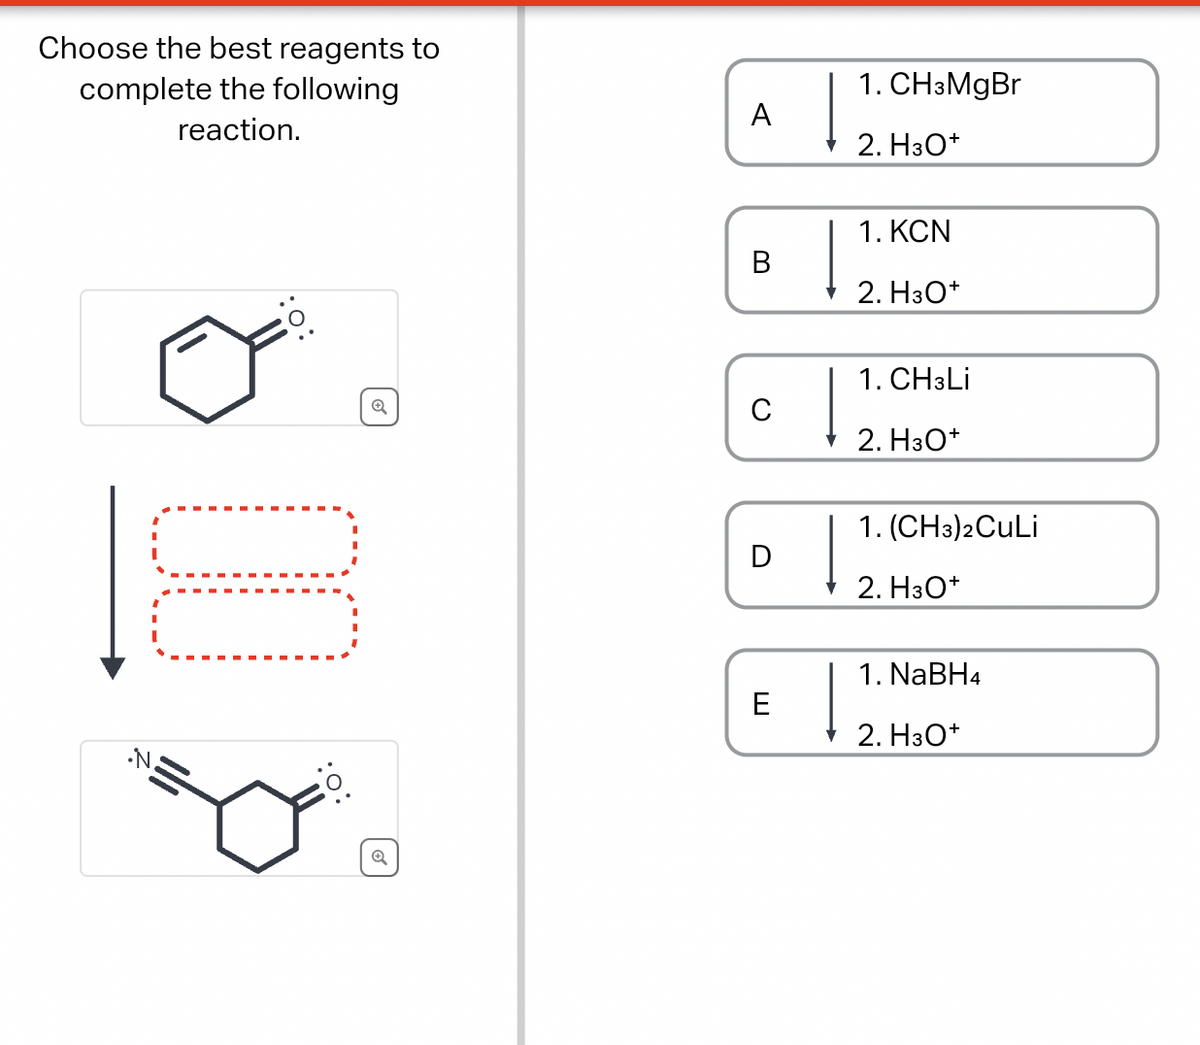 Choose the best reagents to
complete the following
reaction.
•N.
1. CH3MgBr
A
2. H3O+
1. KCN
B
2. H3O+
Q
C
↓
1. CH3Li
2. H3O+
1. (CH3)2CuLi
D
2. H3O+
:0:
Q
E
1. NaBH4
2. H3O+